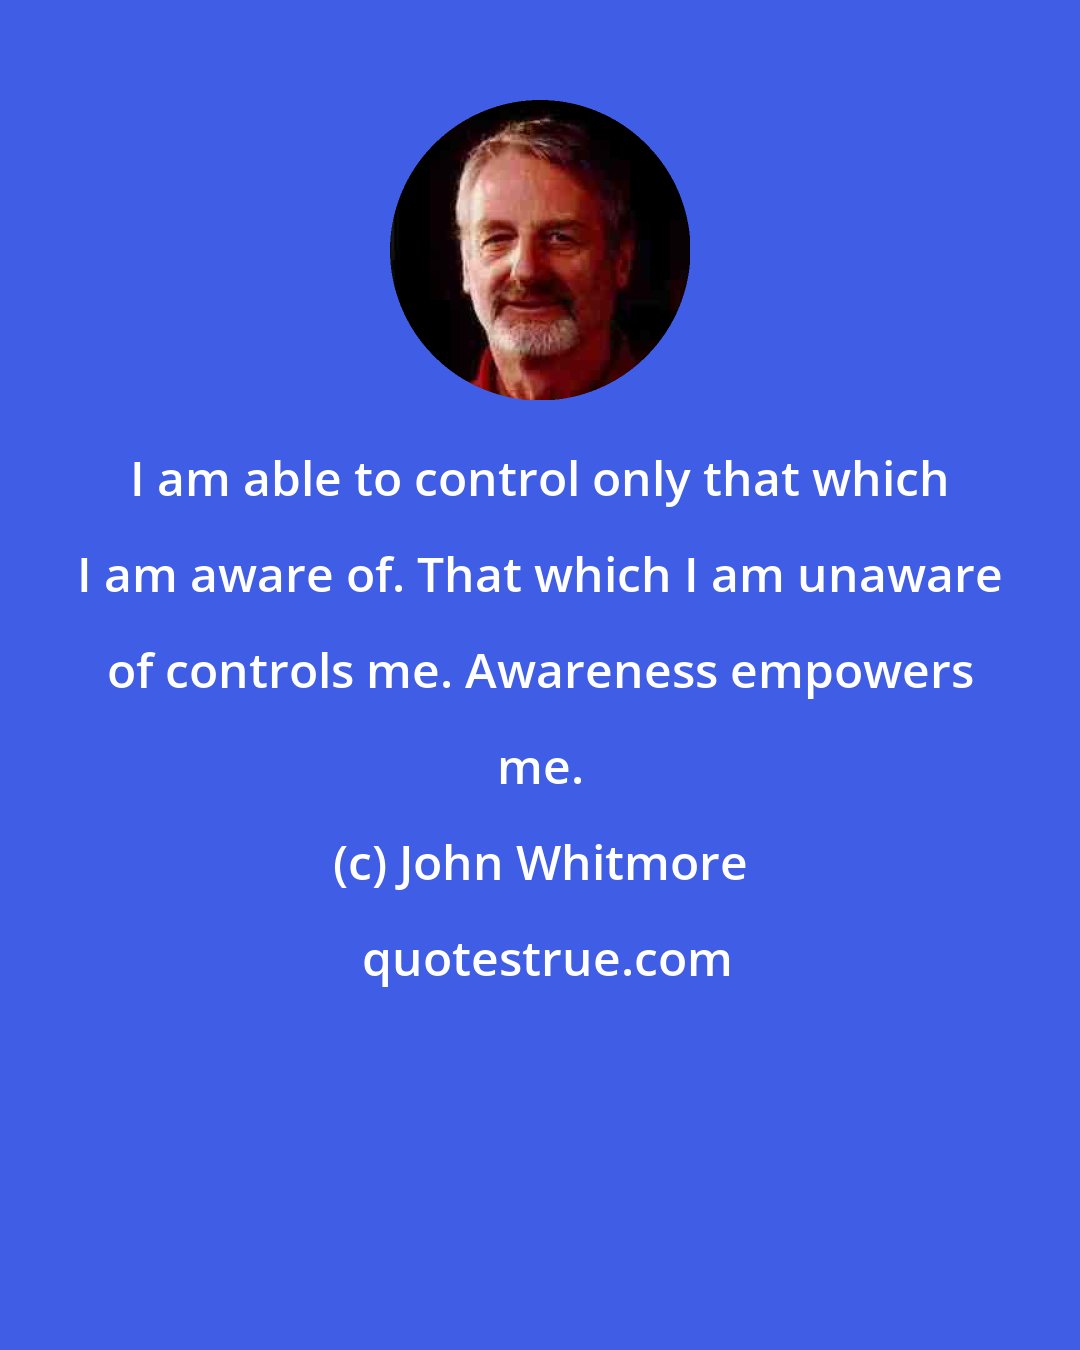 John Whitmore: I am able to control only that which I am aware of. That which I am unaware of controls me. Awareness empowers me.